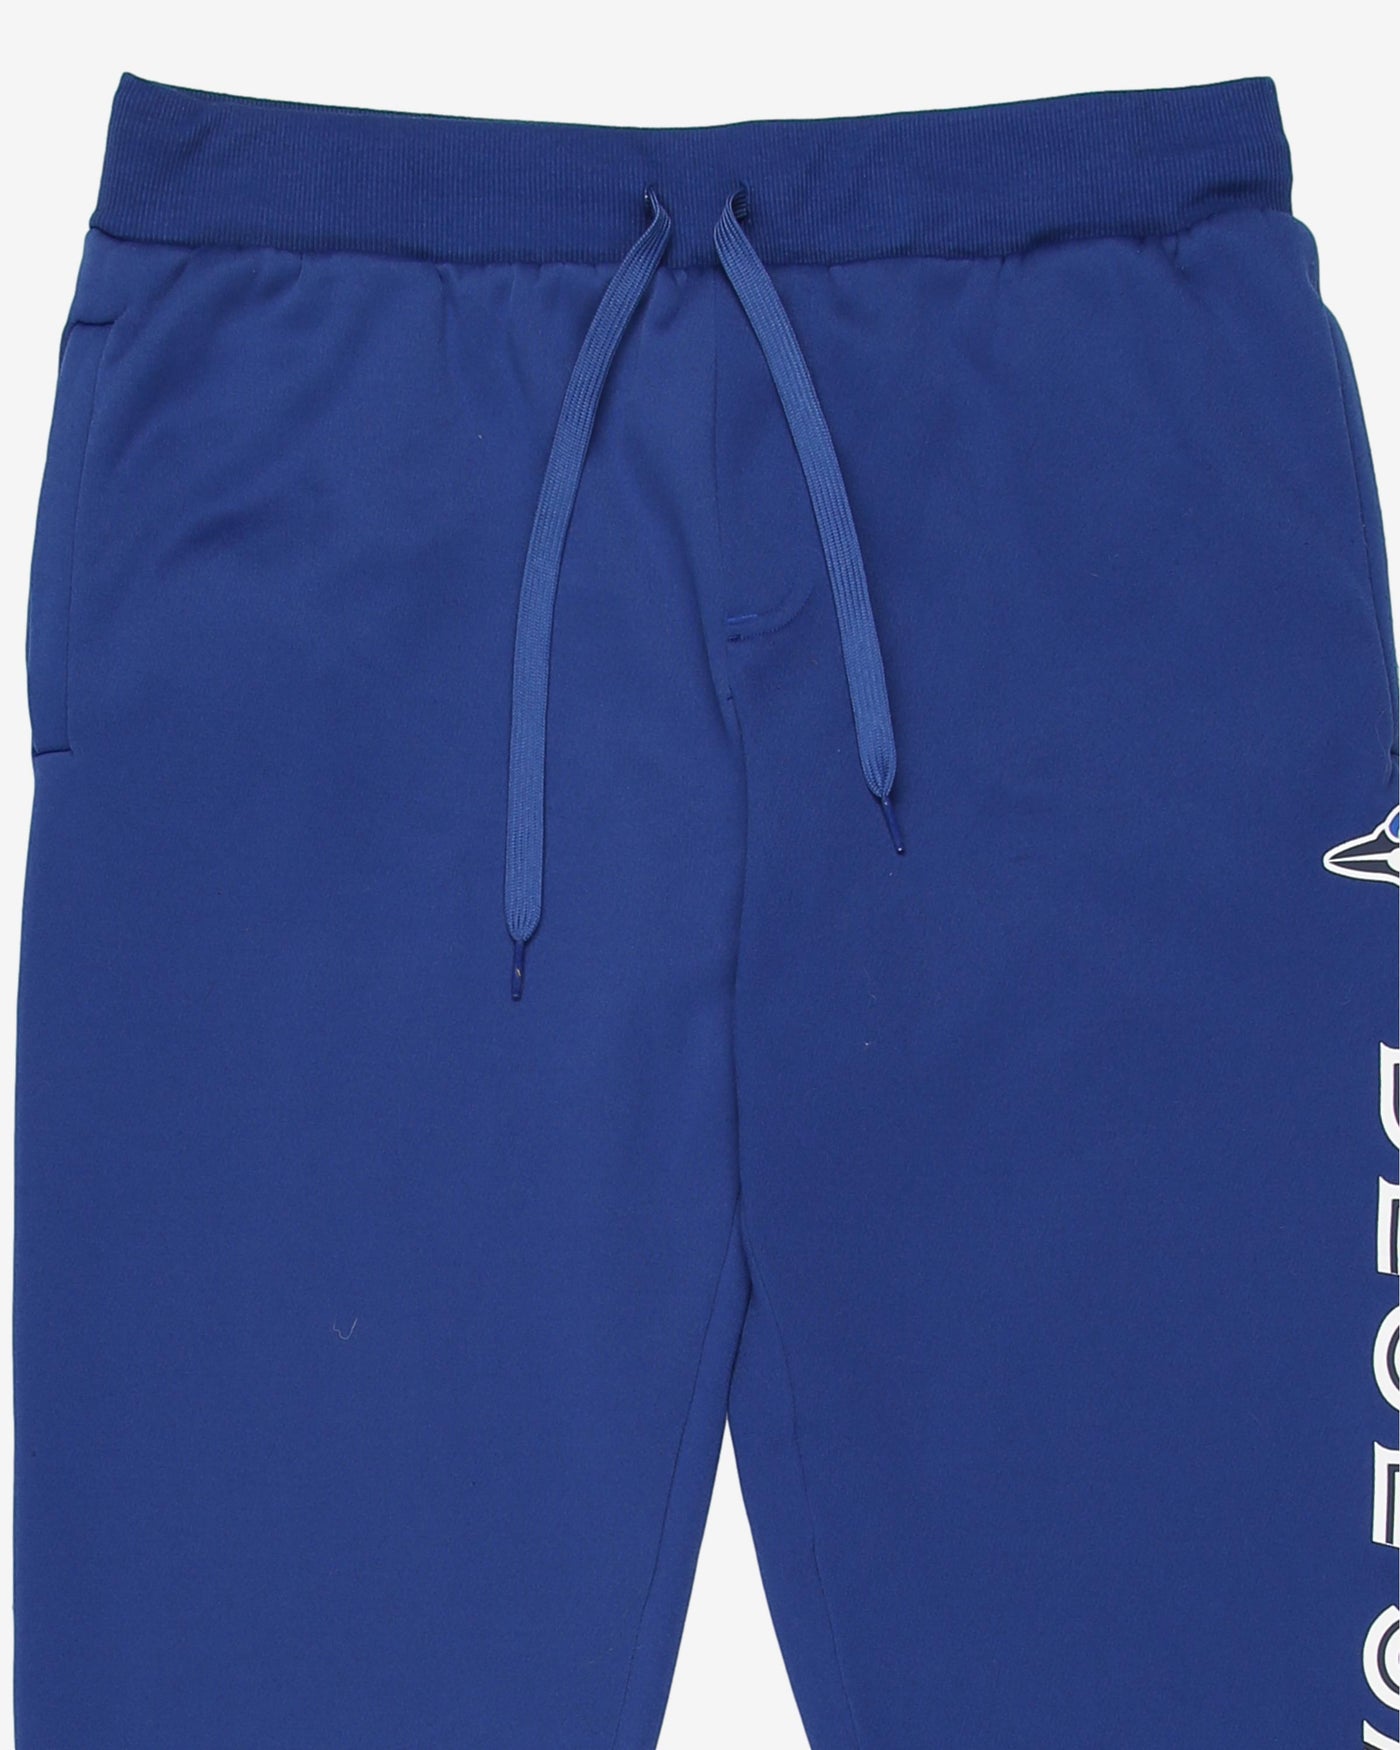 Blue Jays track trousers - S